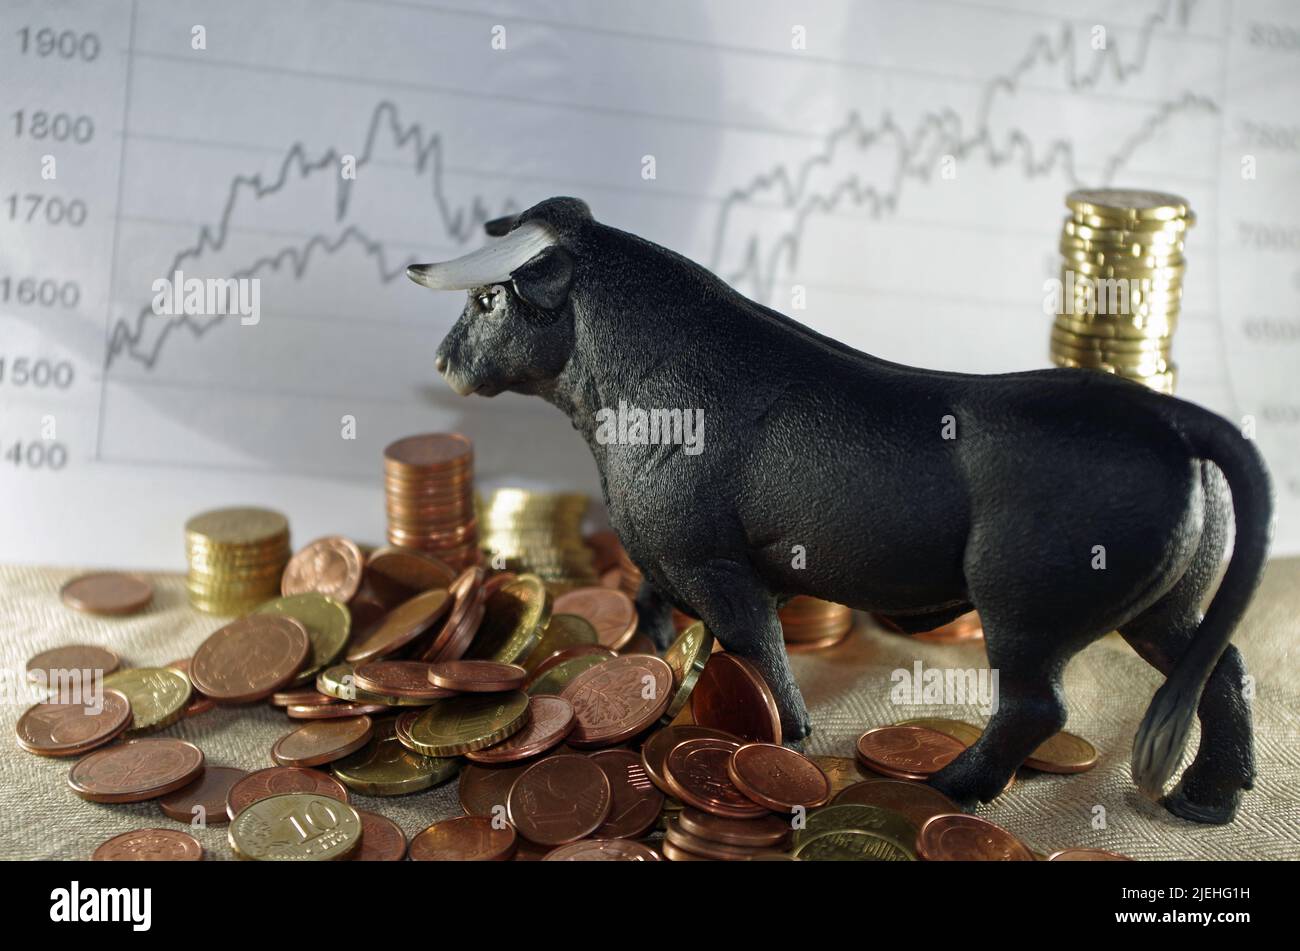 Play with Values, our Money. Who are the Winners. Stock Photo